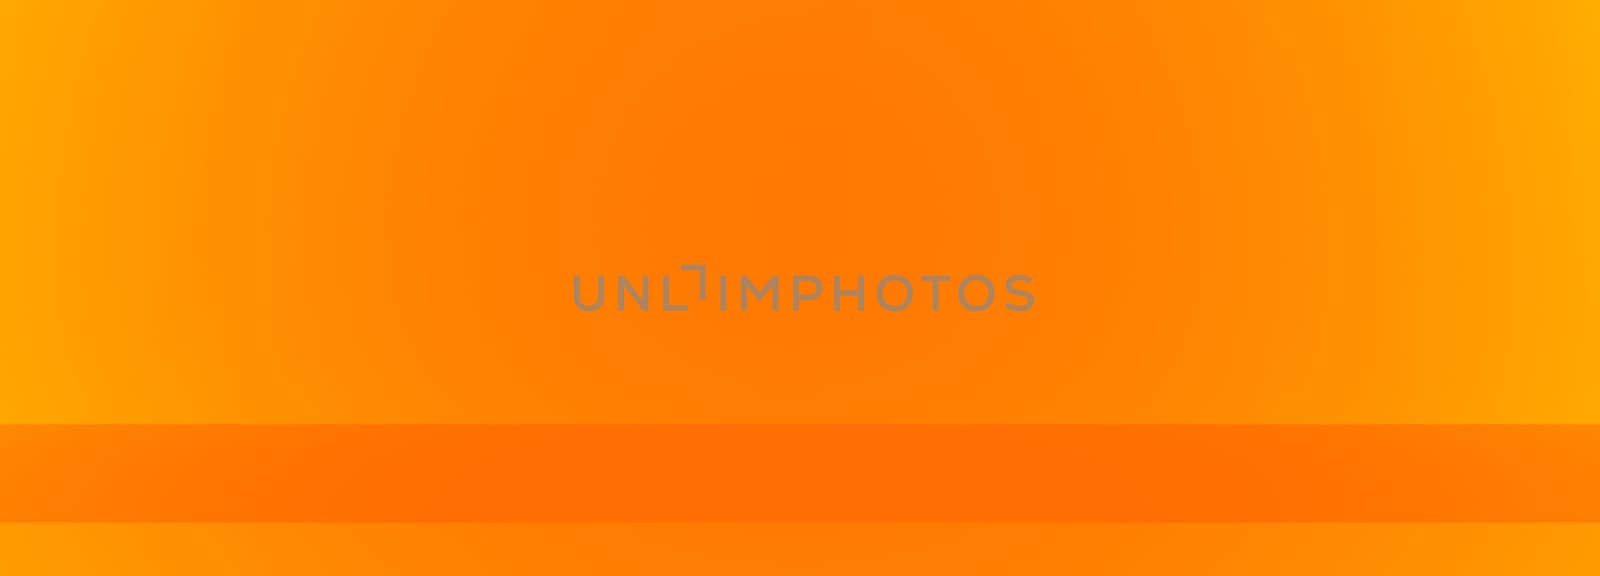 abstract studio orange background. Summer concept. by ImagesRouges